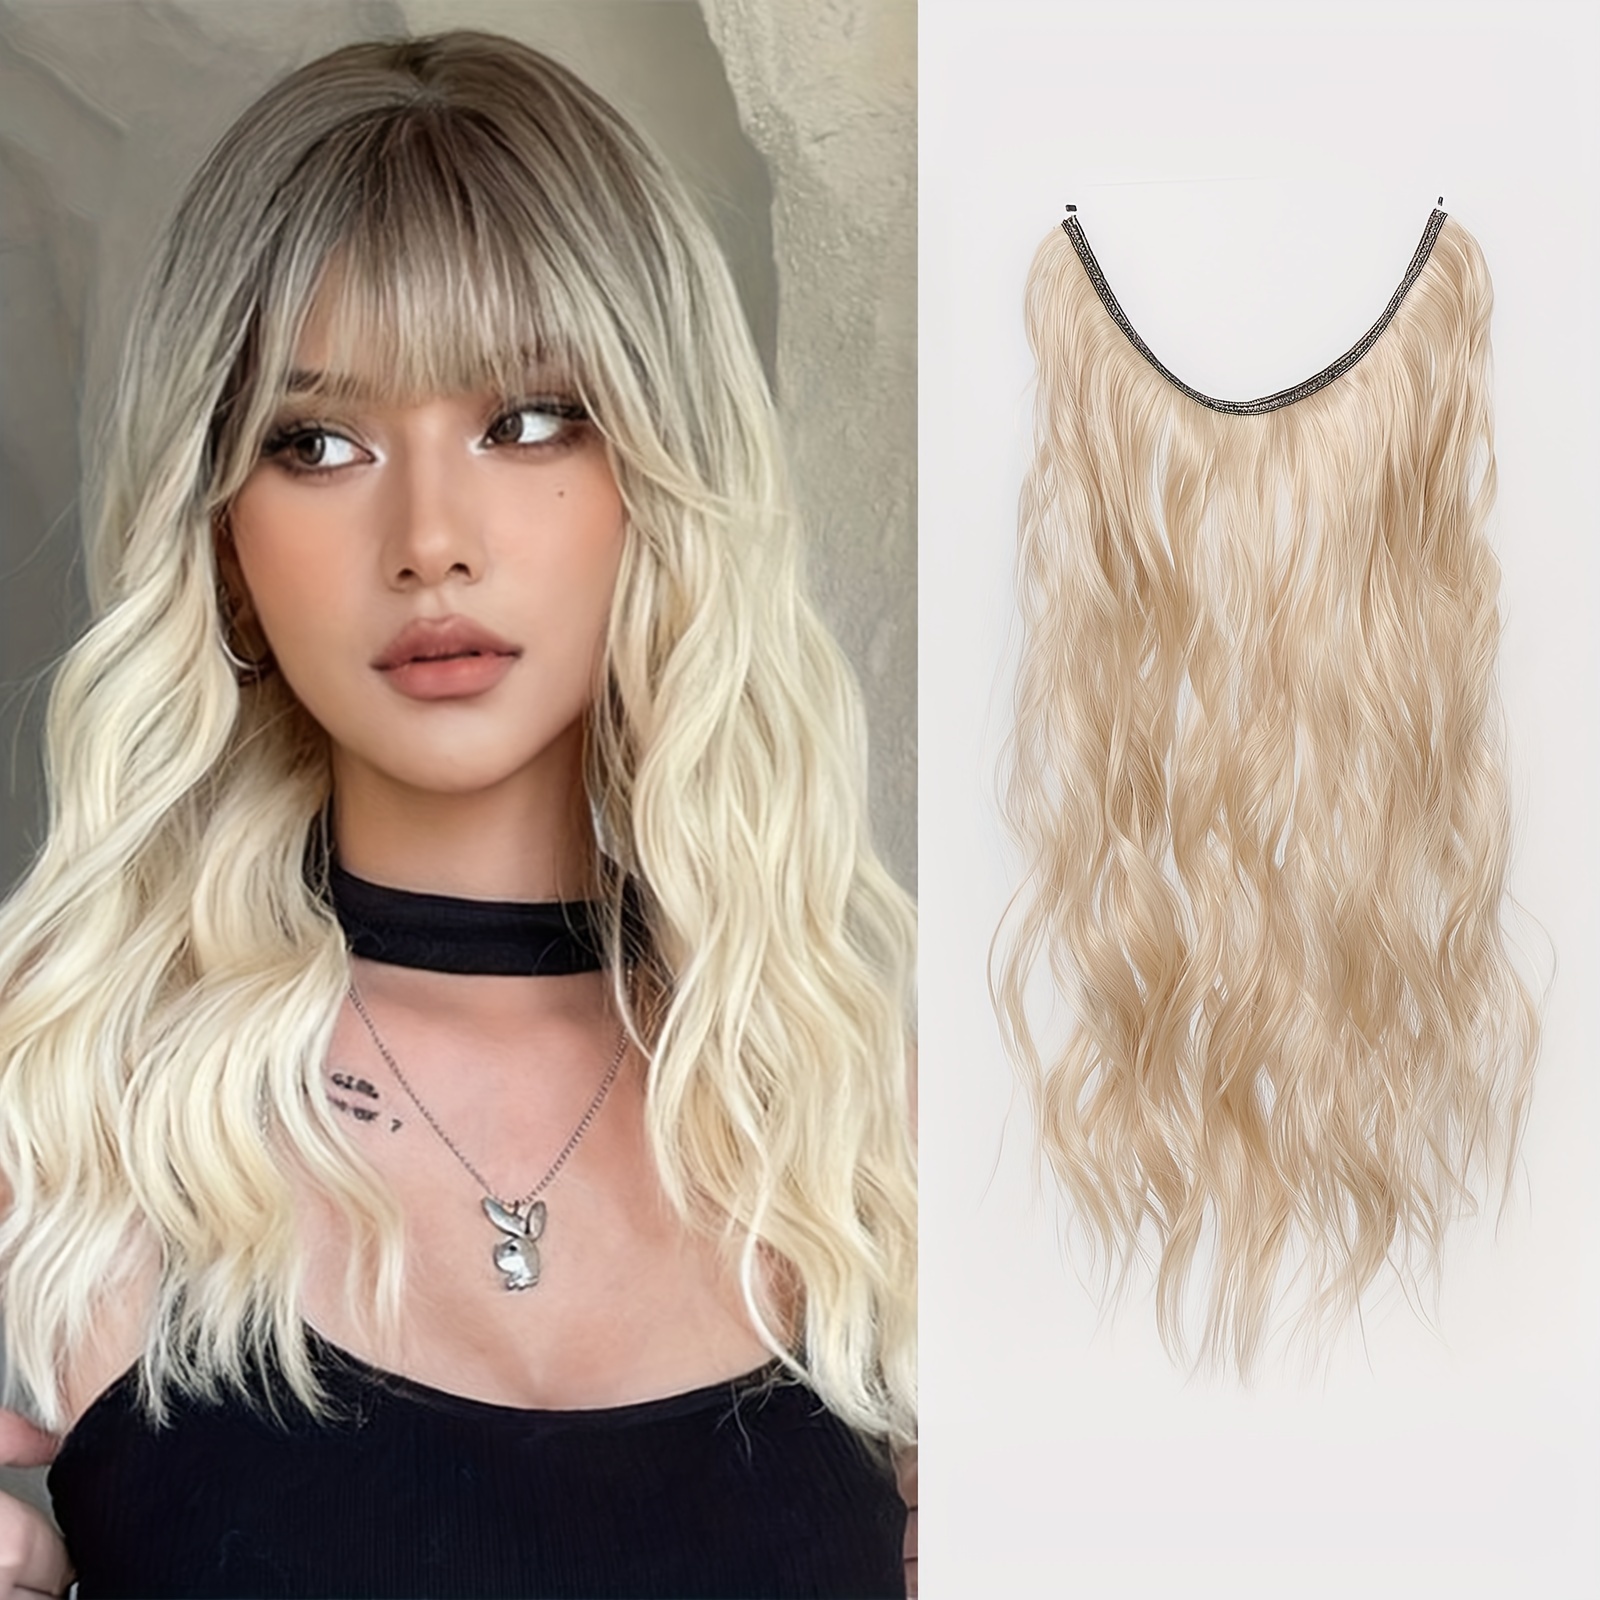 Invisible Wire Hair Extension with Adjustable Size Transparent Headband Long Curly Wavy Synthetic Hair Light Brown Mix Blonde Long Wavy Secret Hair